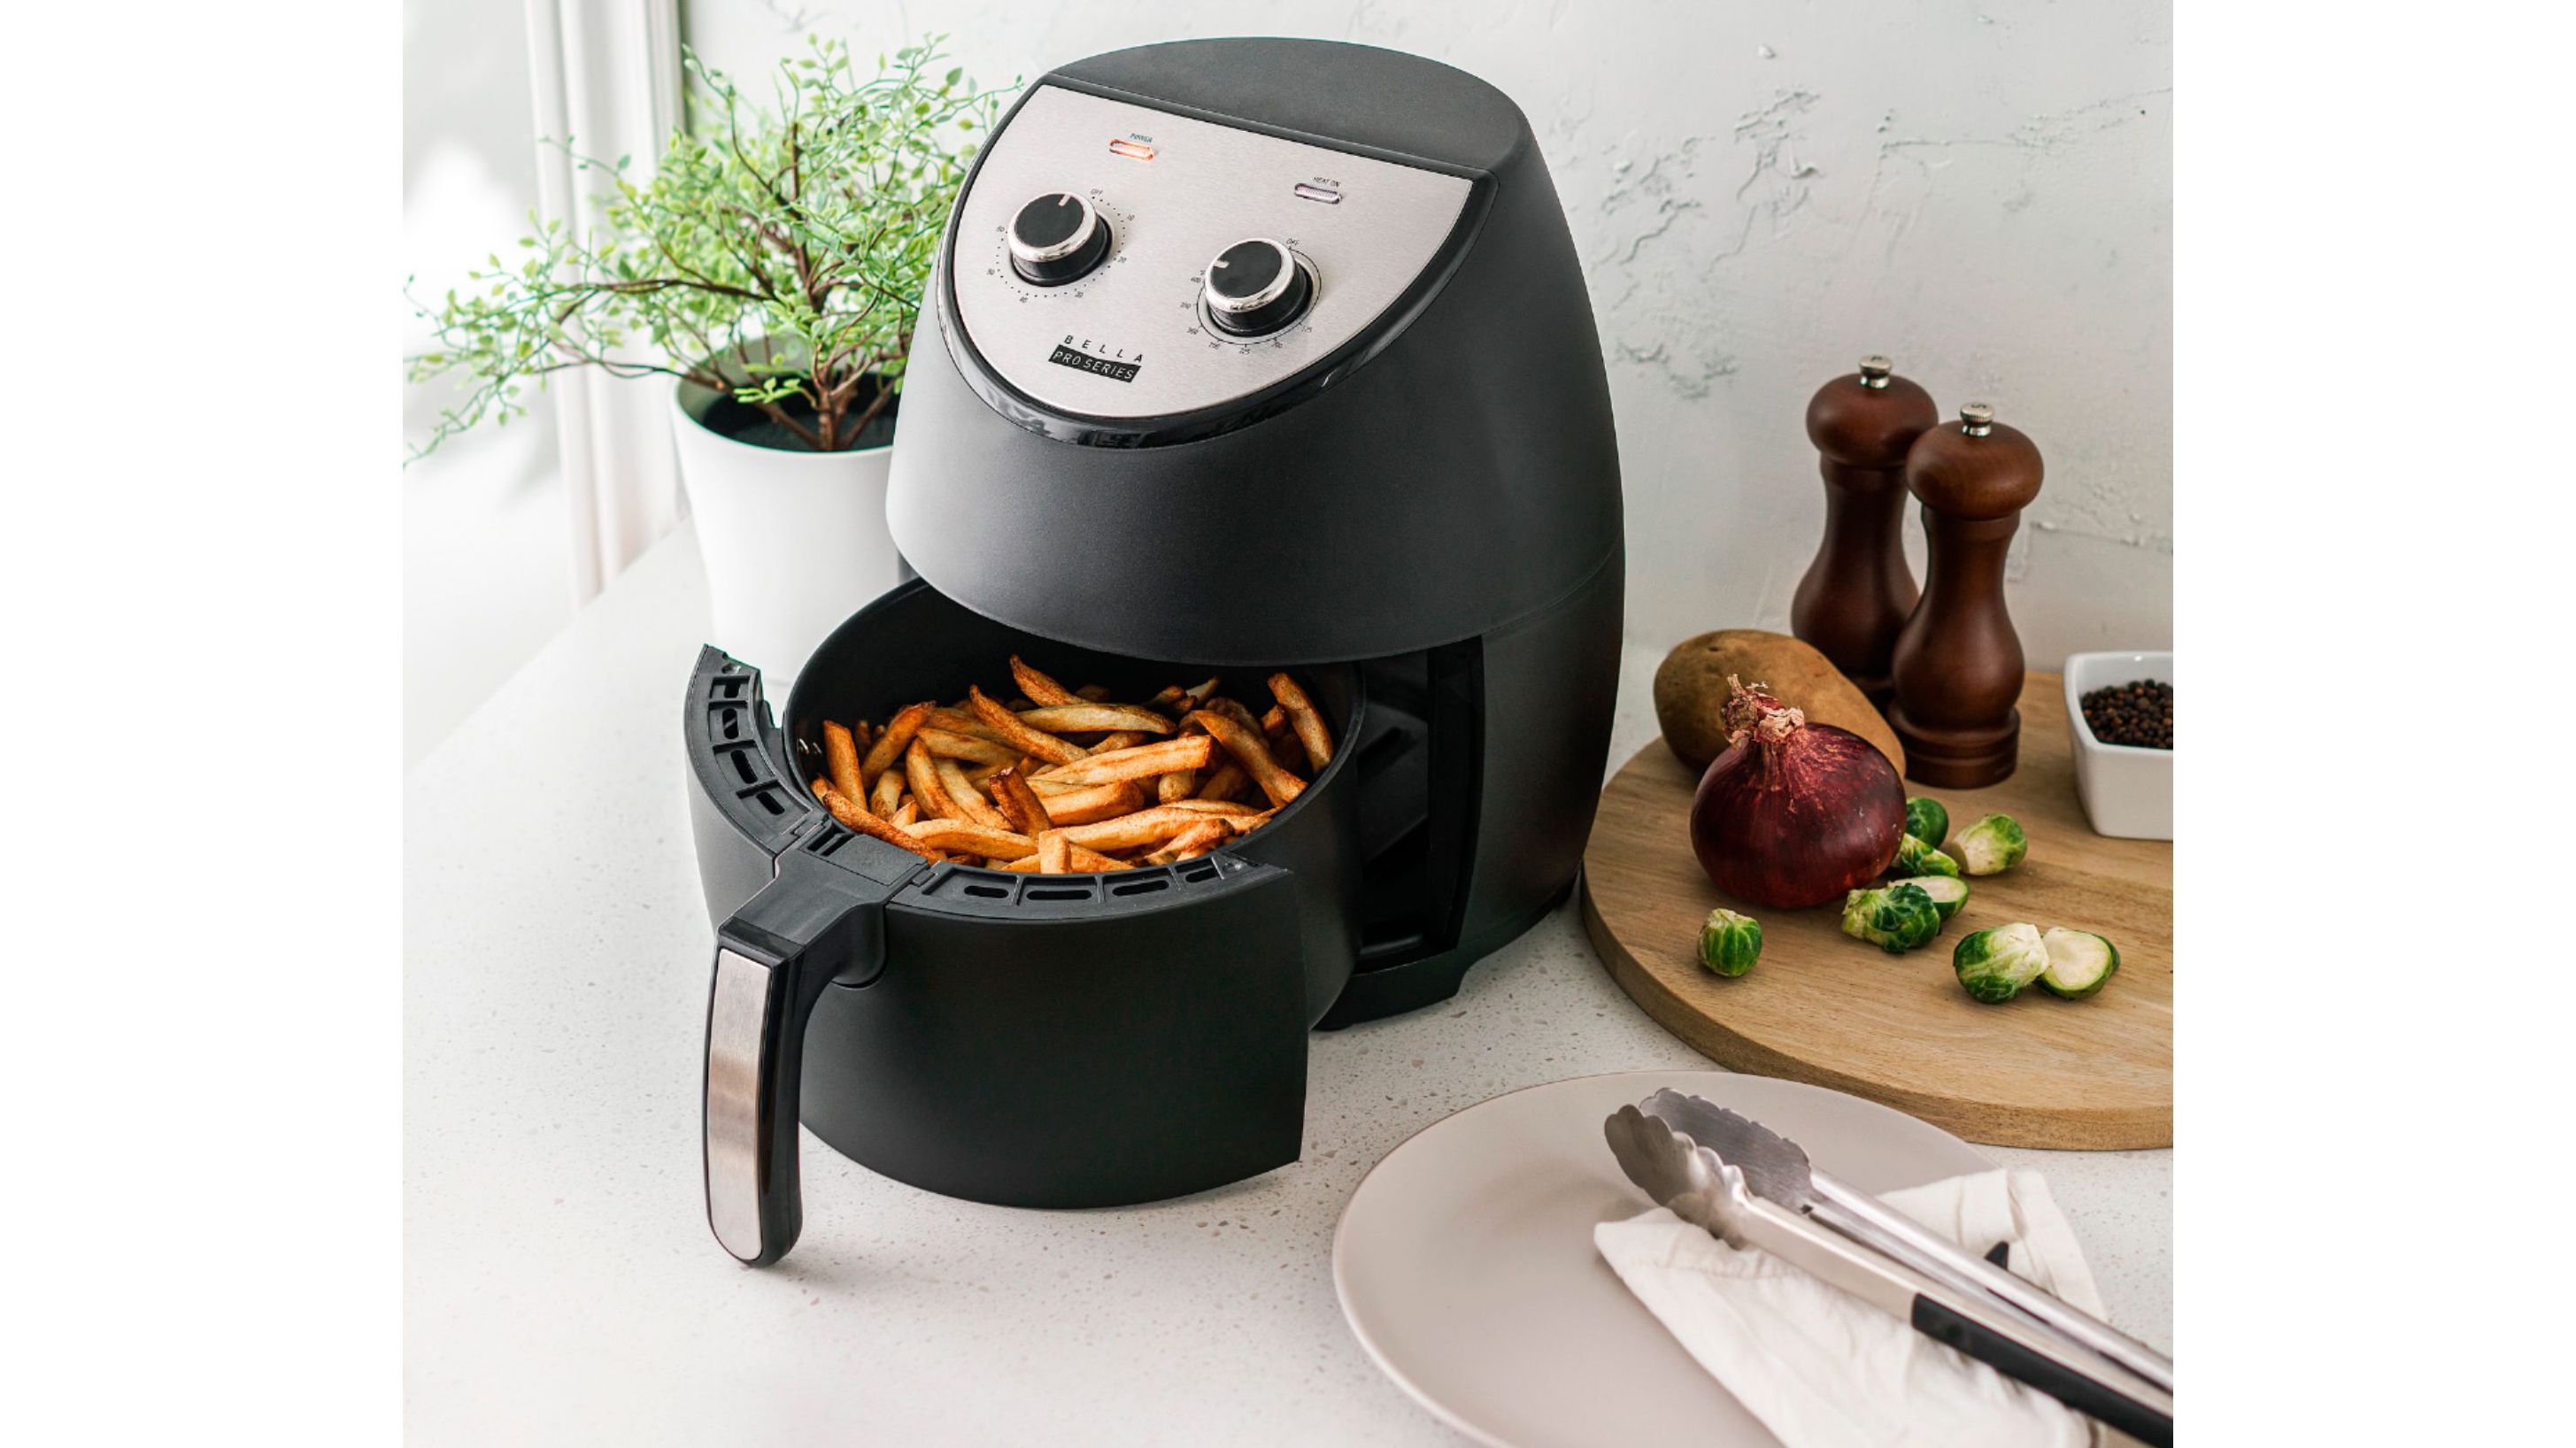 Didn't buy an air fryer during Black Friday? They're still